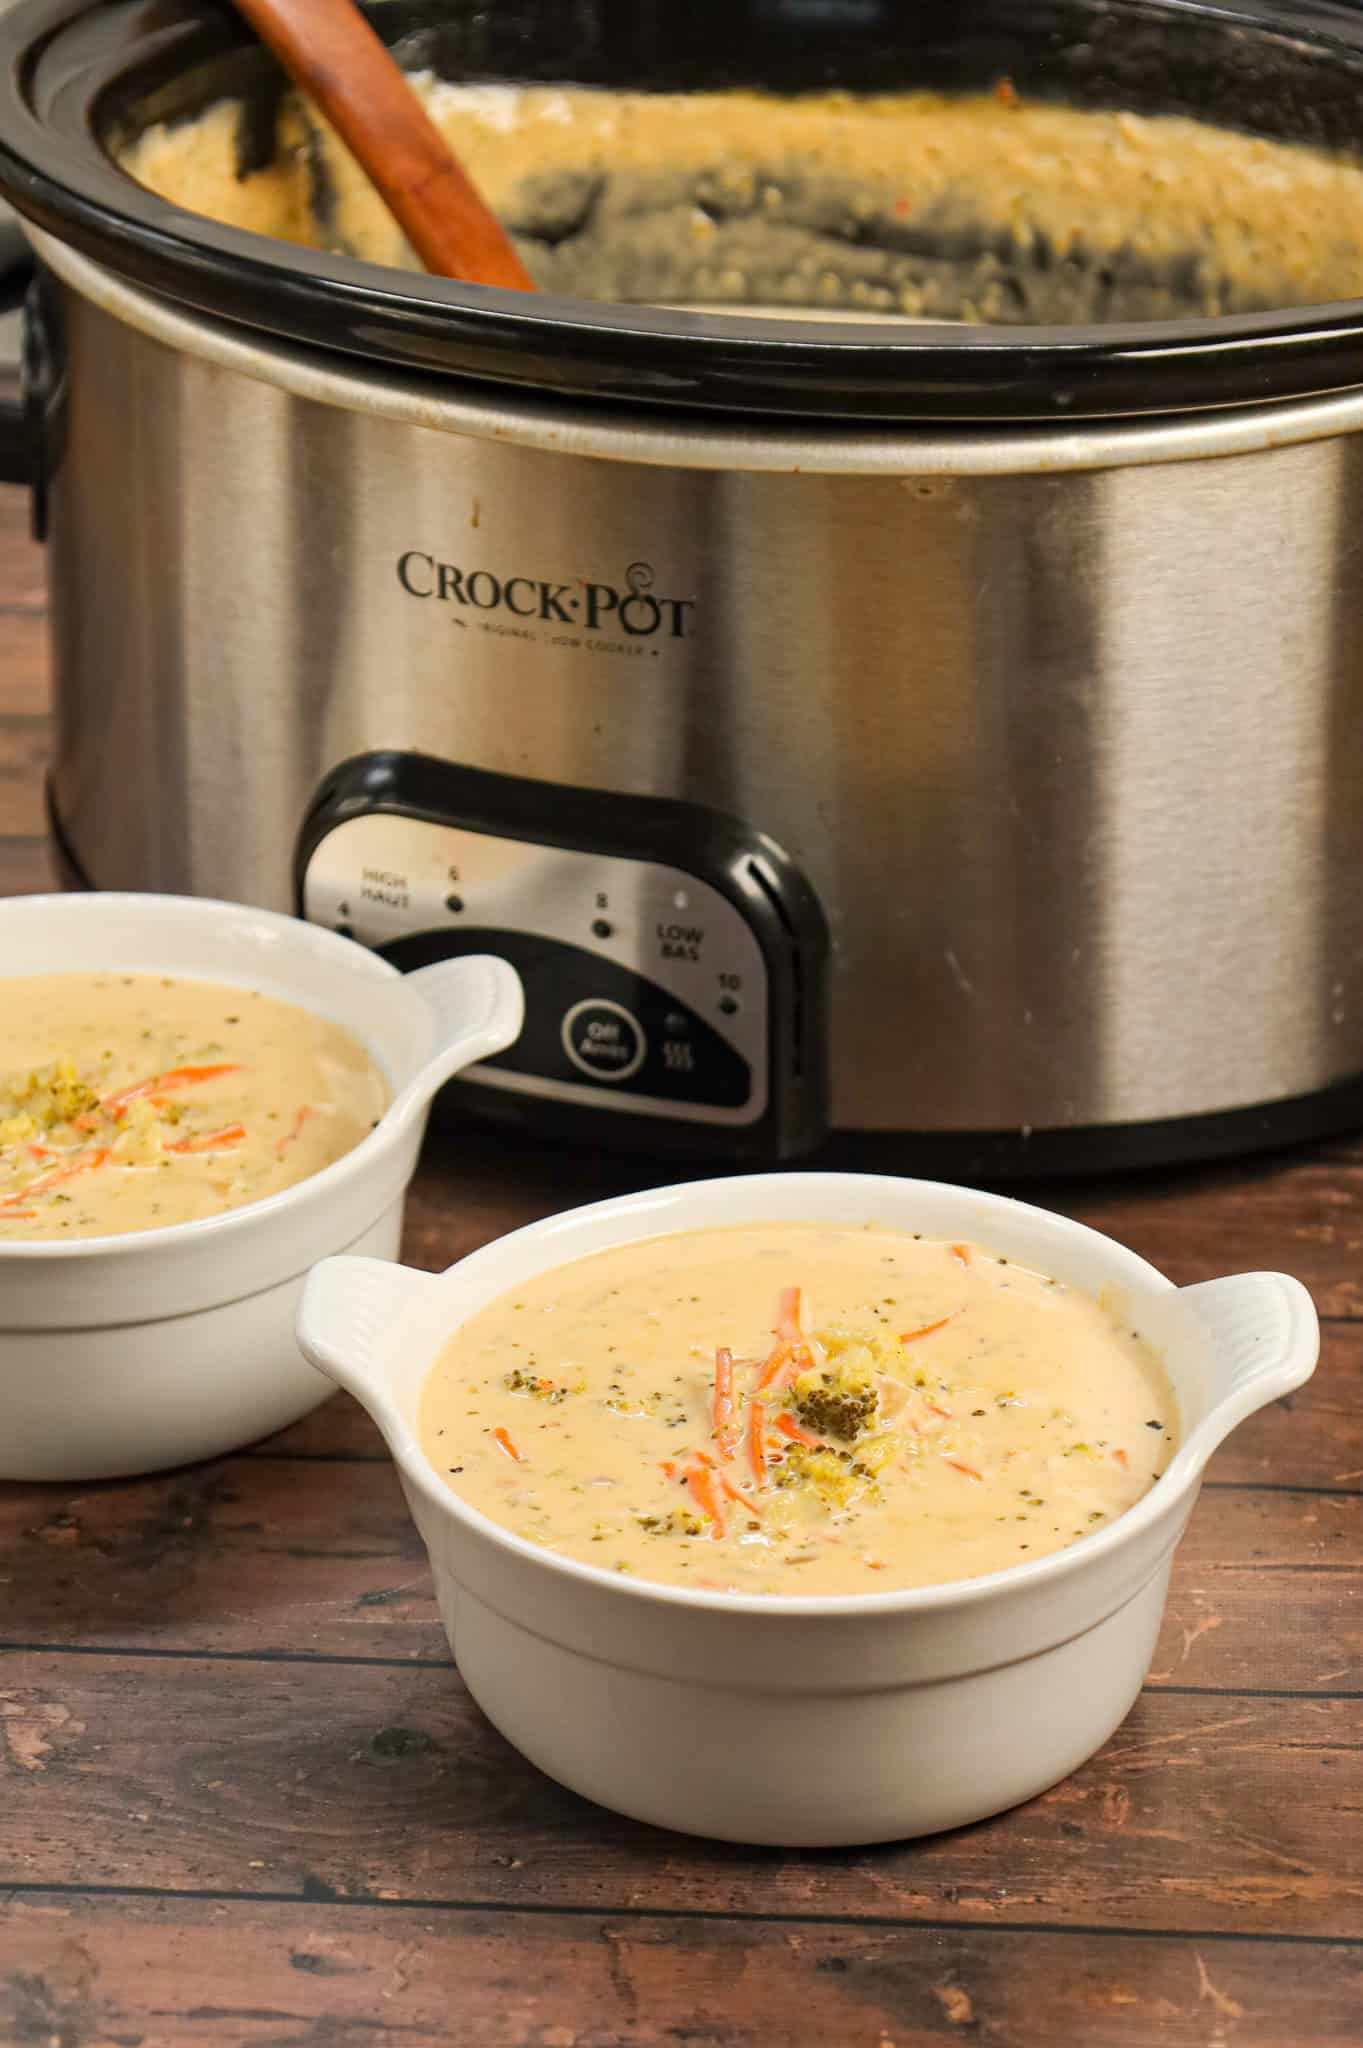 Crock Pot Broccoli Cheddar Soup is a hearty cream soup recipe loaded with broccoli florets, carrots and cheddar cheese.